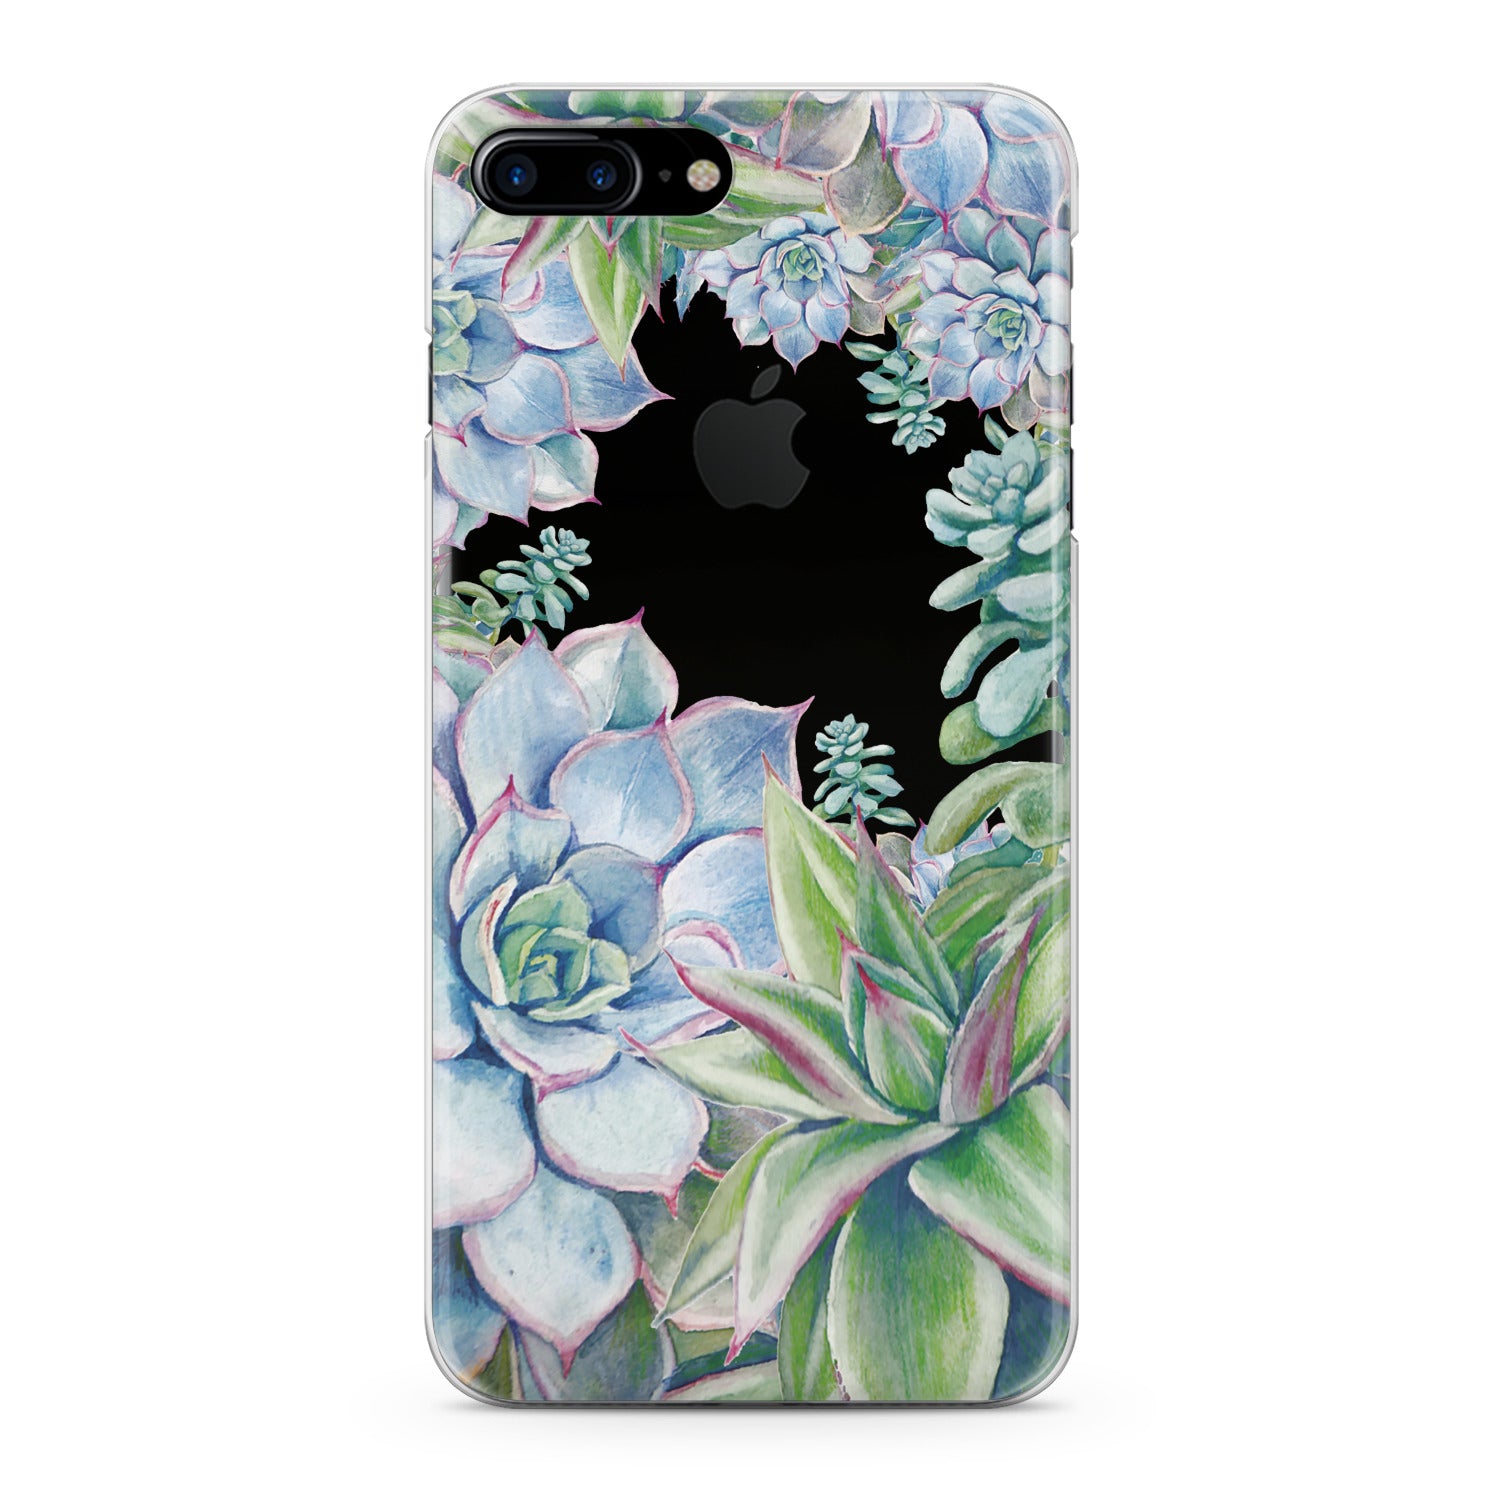 Lex Altern Blue Succulent Phone Case for your iPhone & Android phone.